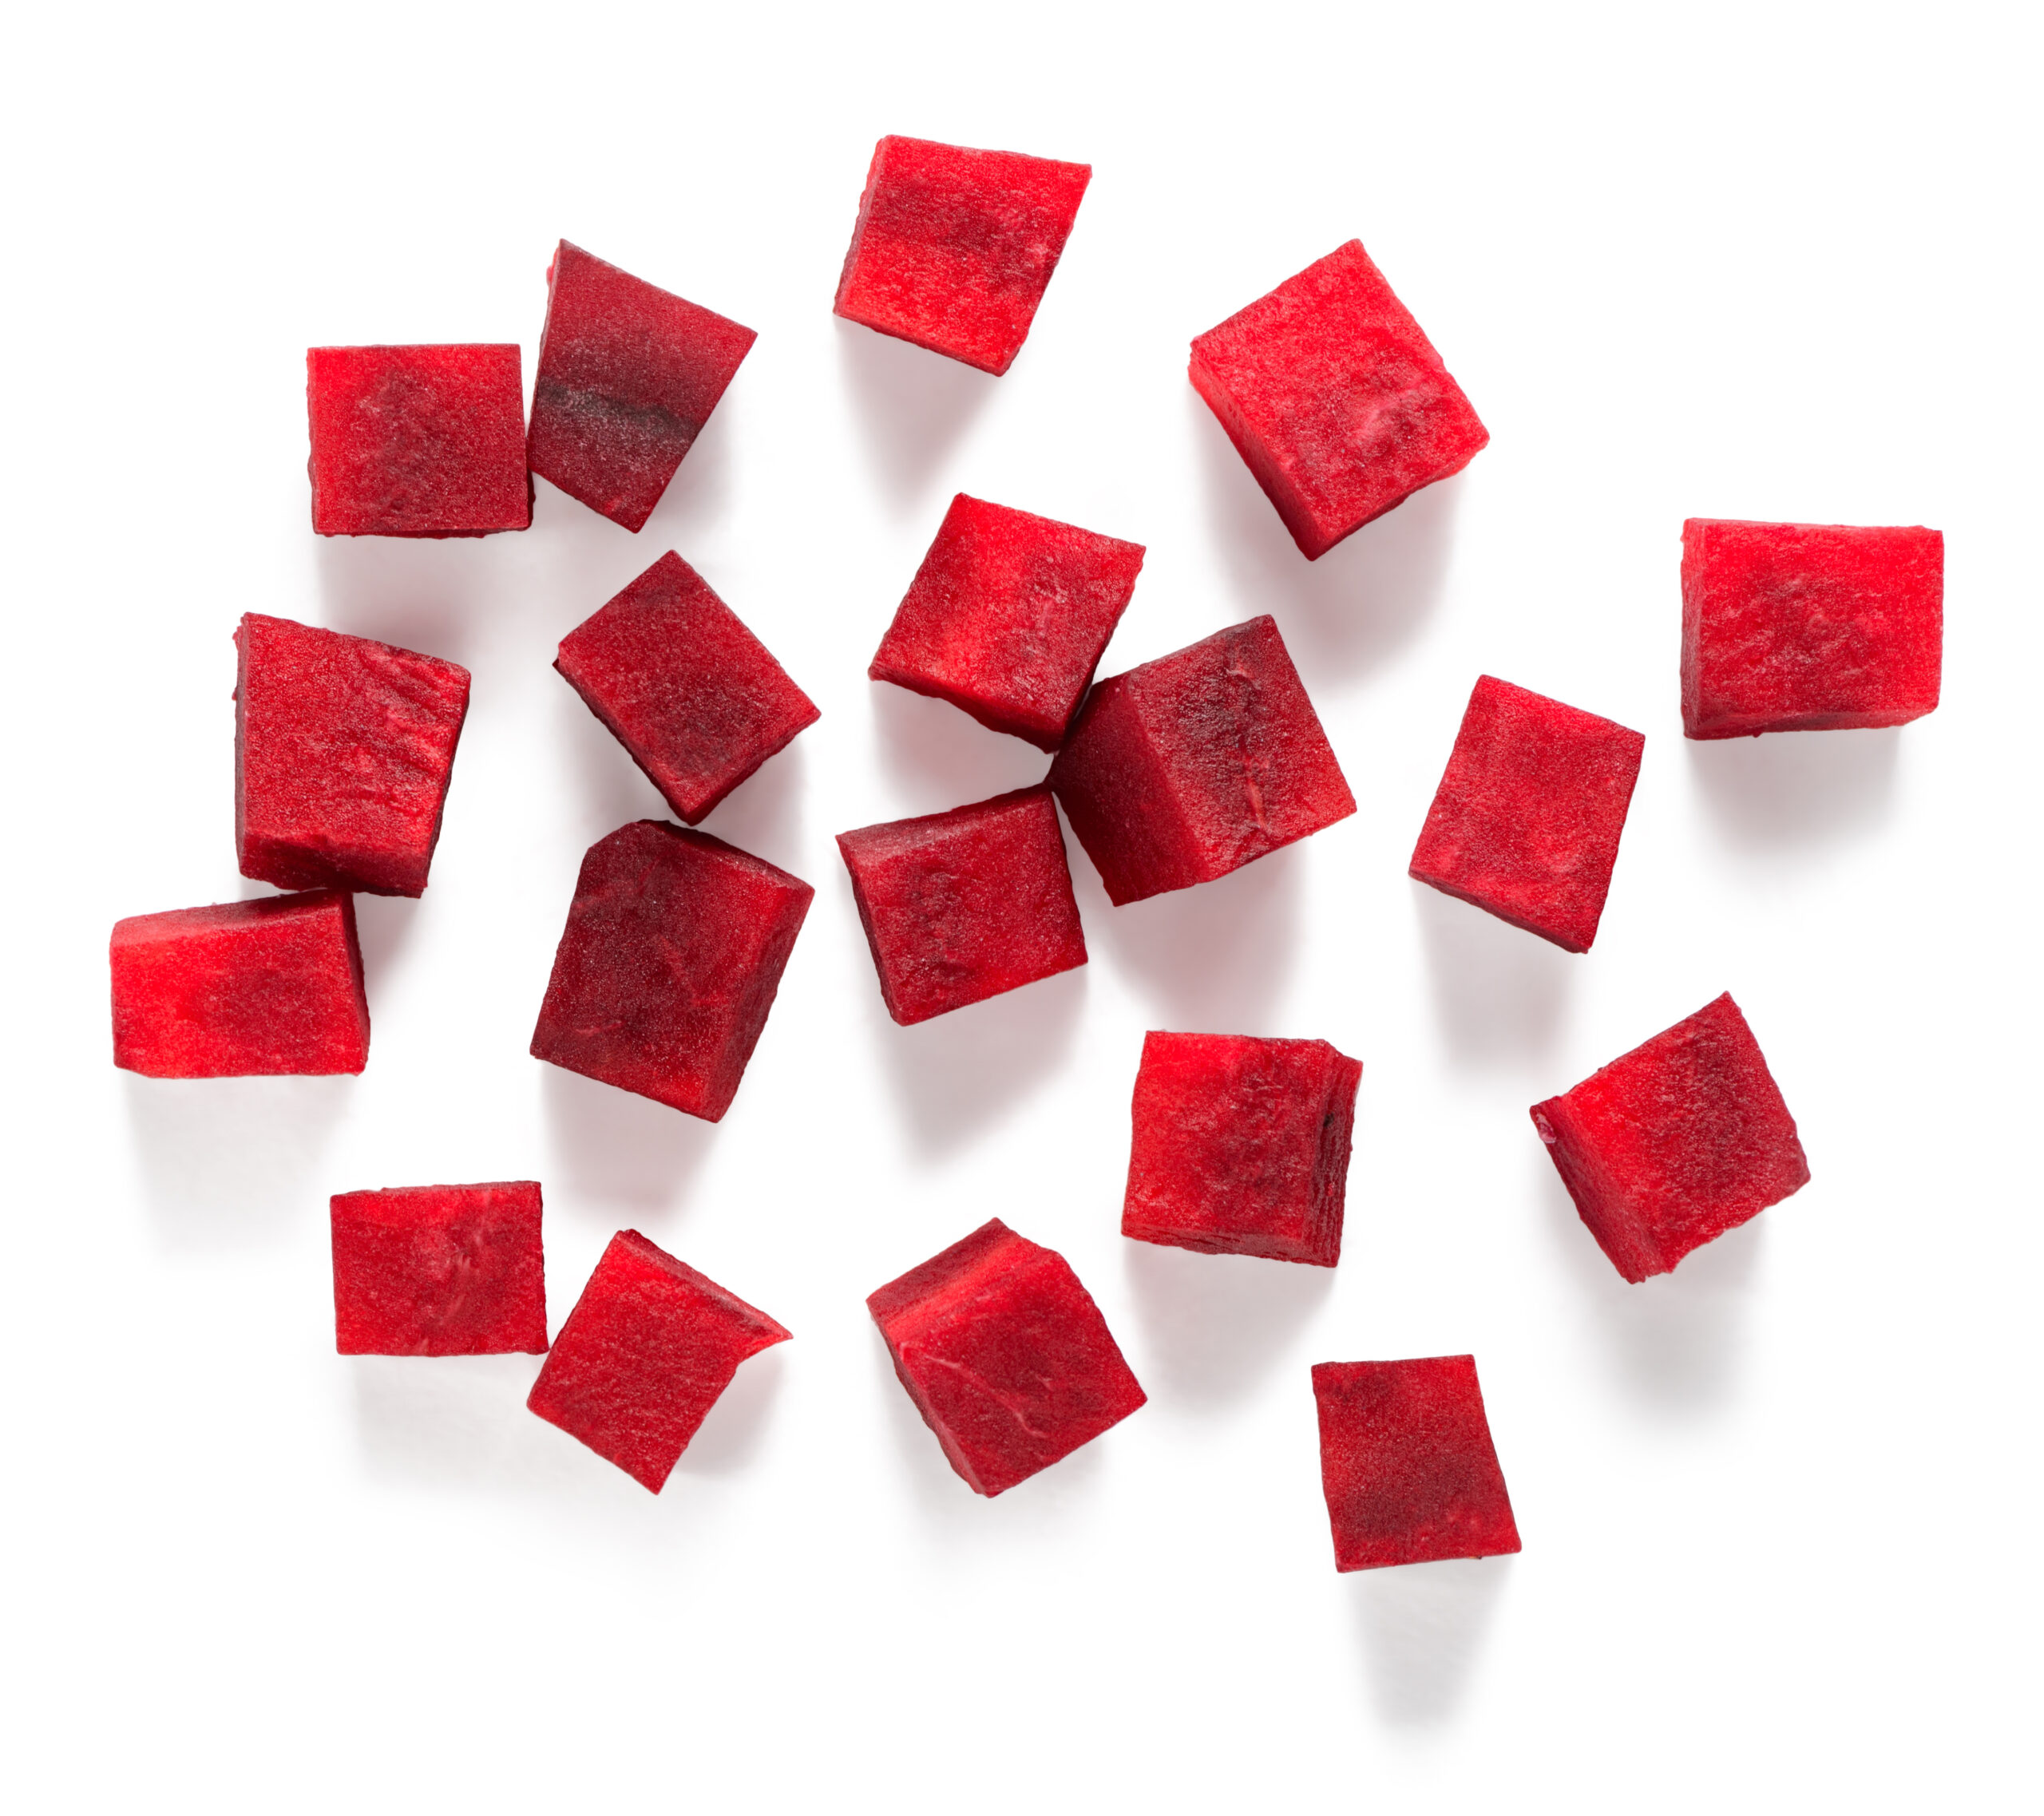 Beetroot diced in medium cubes on white background. Prepared vegetable for adding to food.